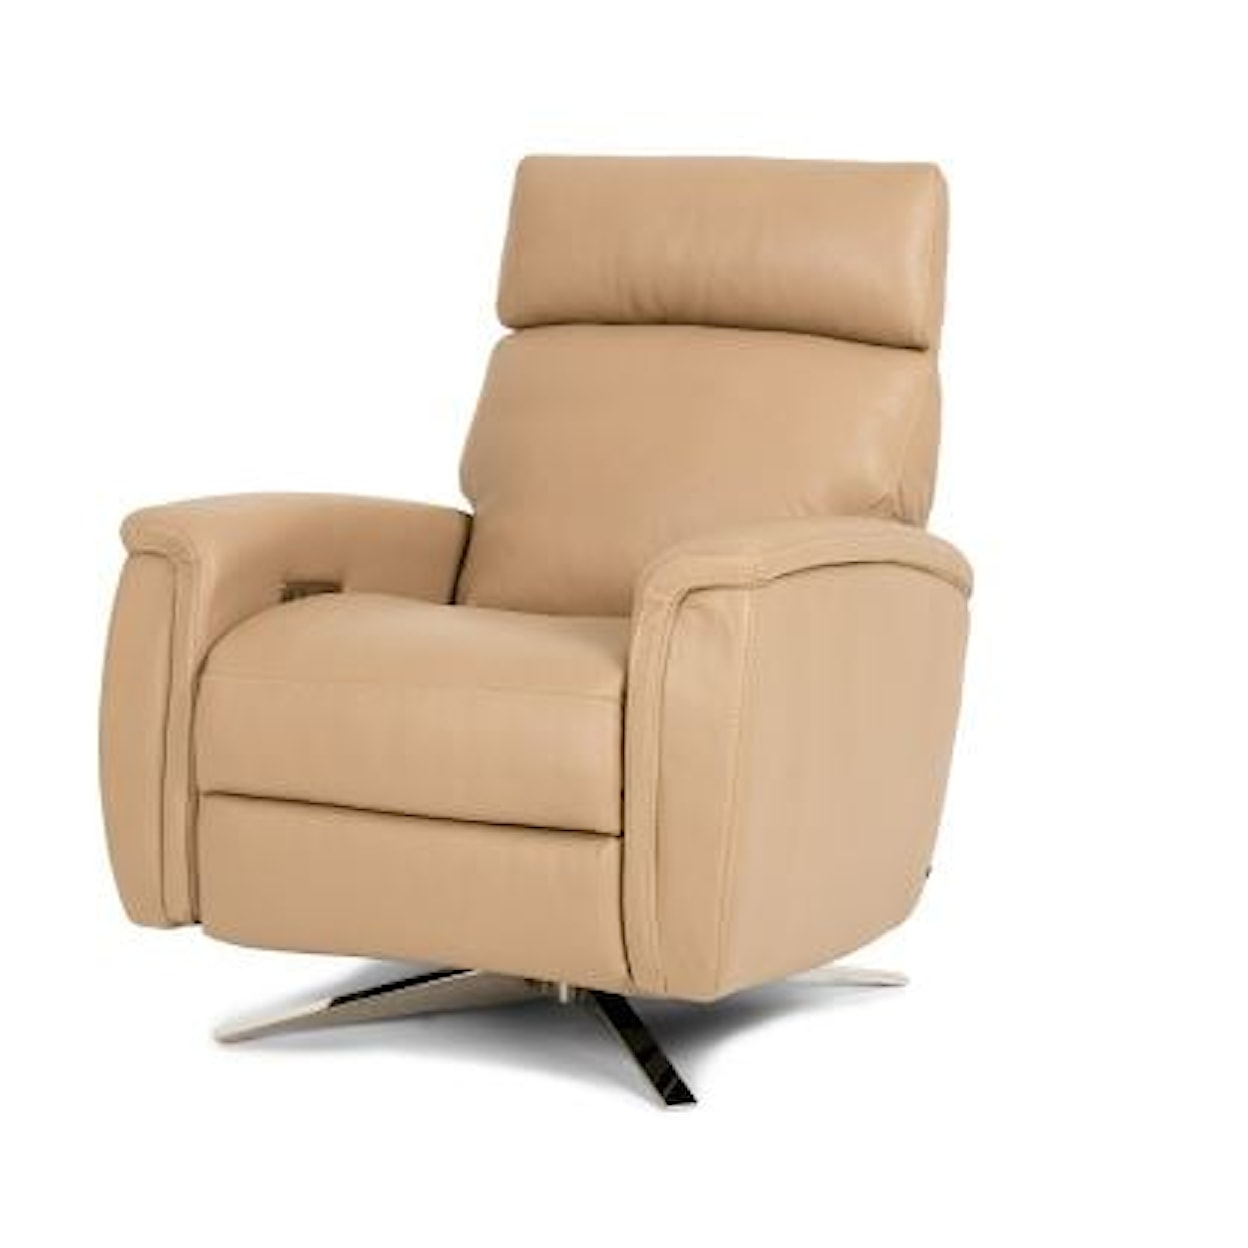 American Leather Chairs Gordon Recliner